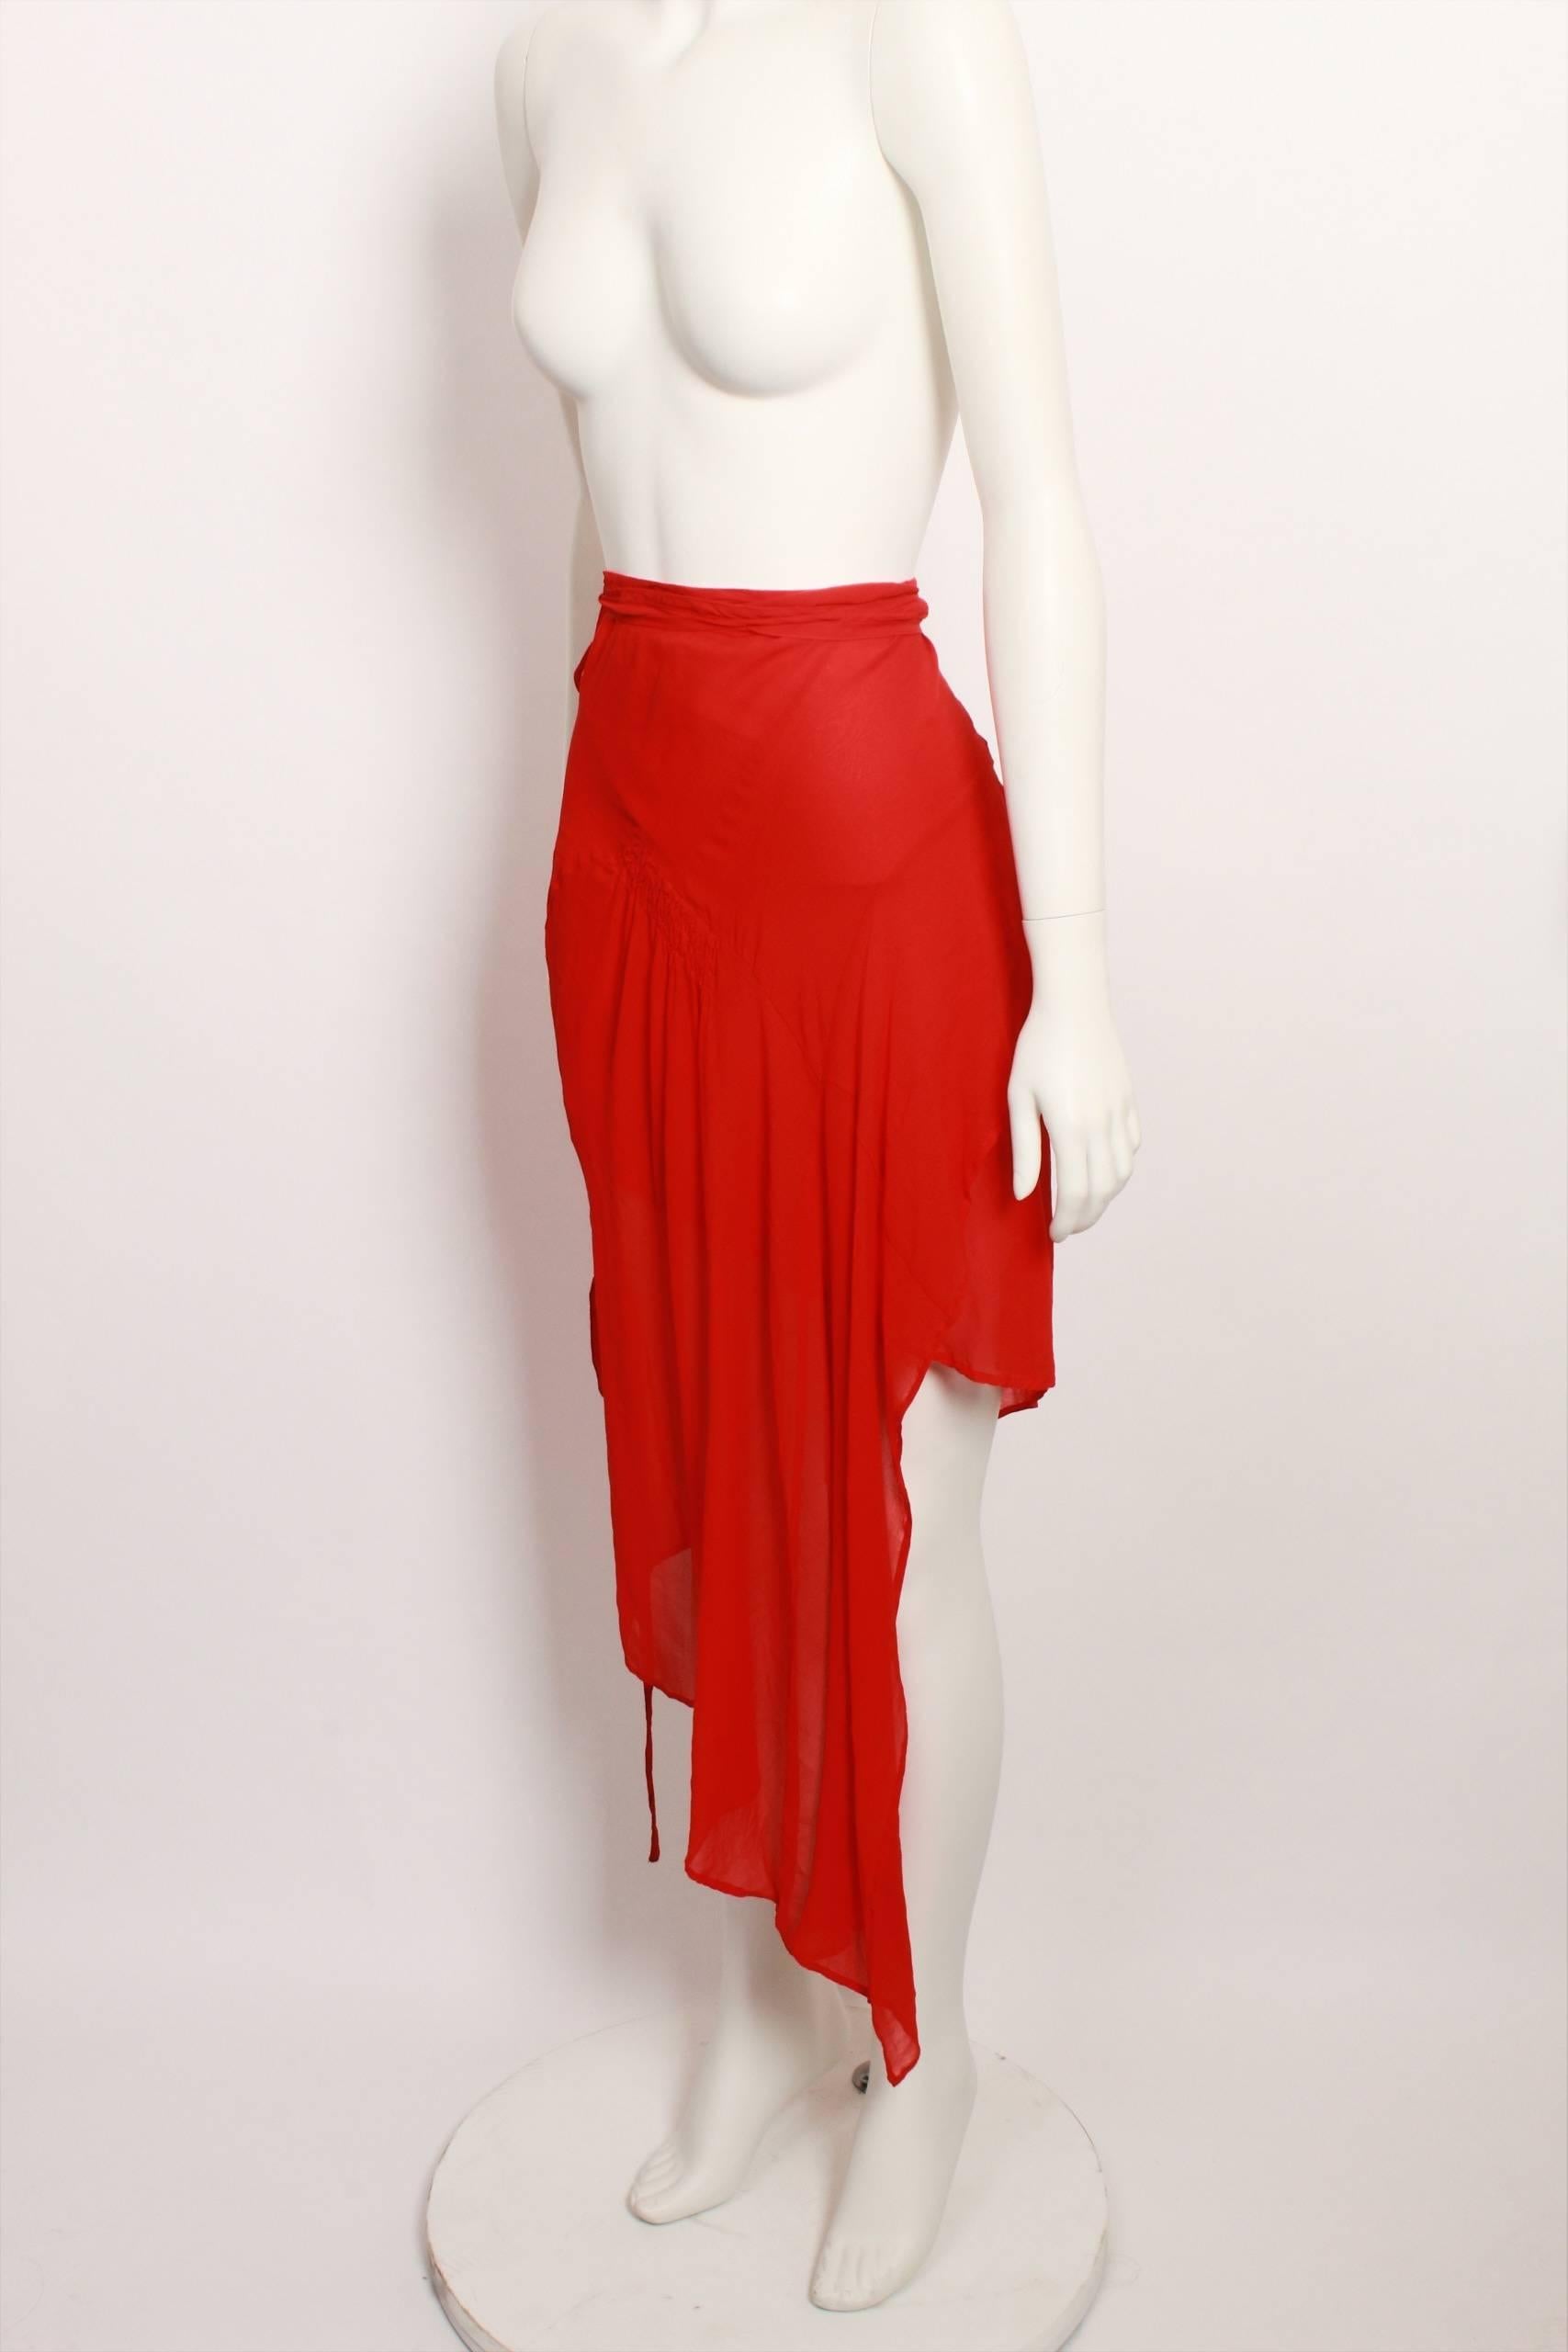 Ann Demeulemeester Skirt In Good Condition For Sale In Melbourne, Victoria